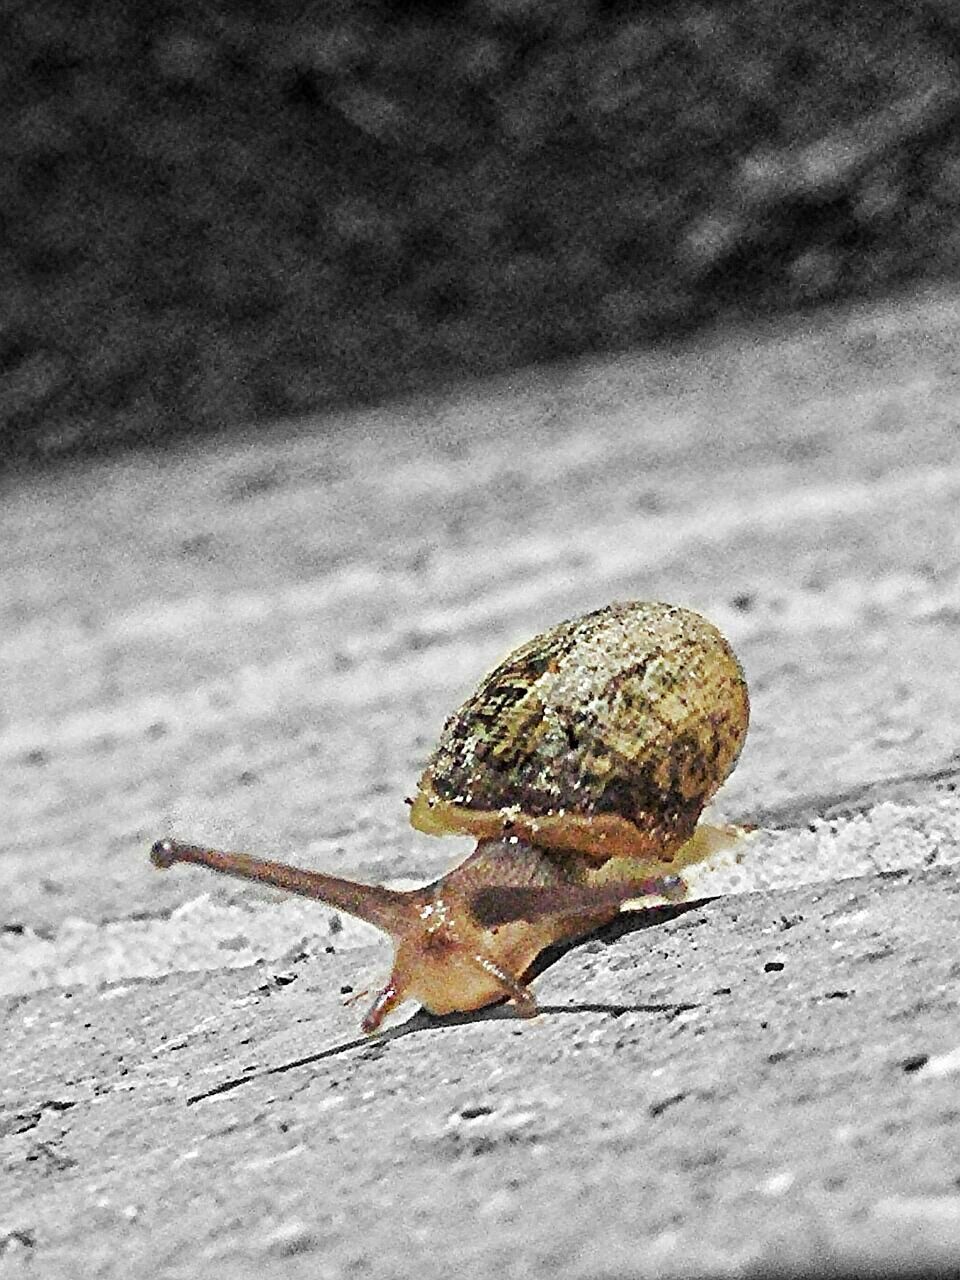 Moving at the speed of snail